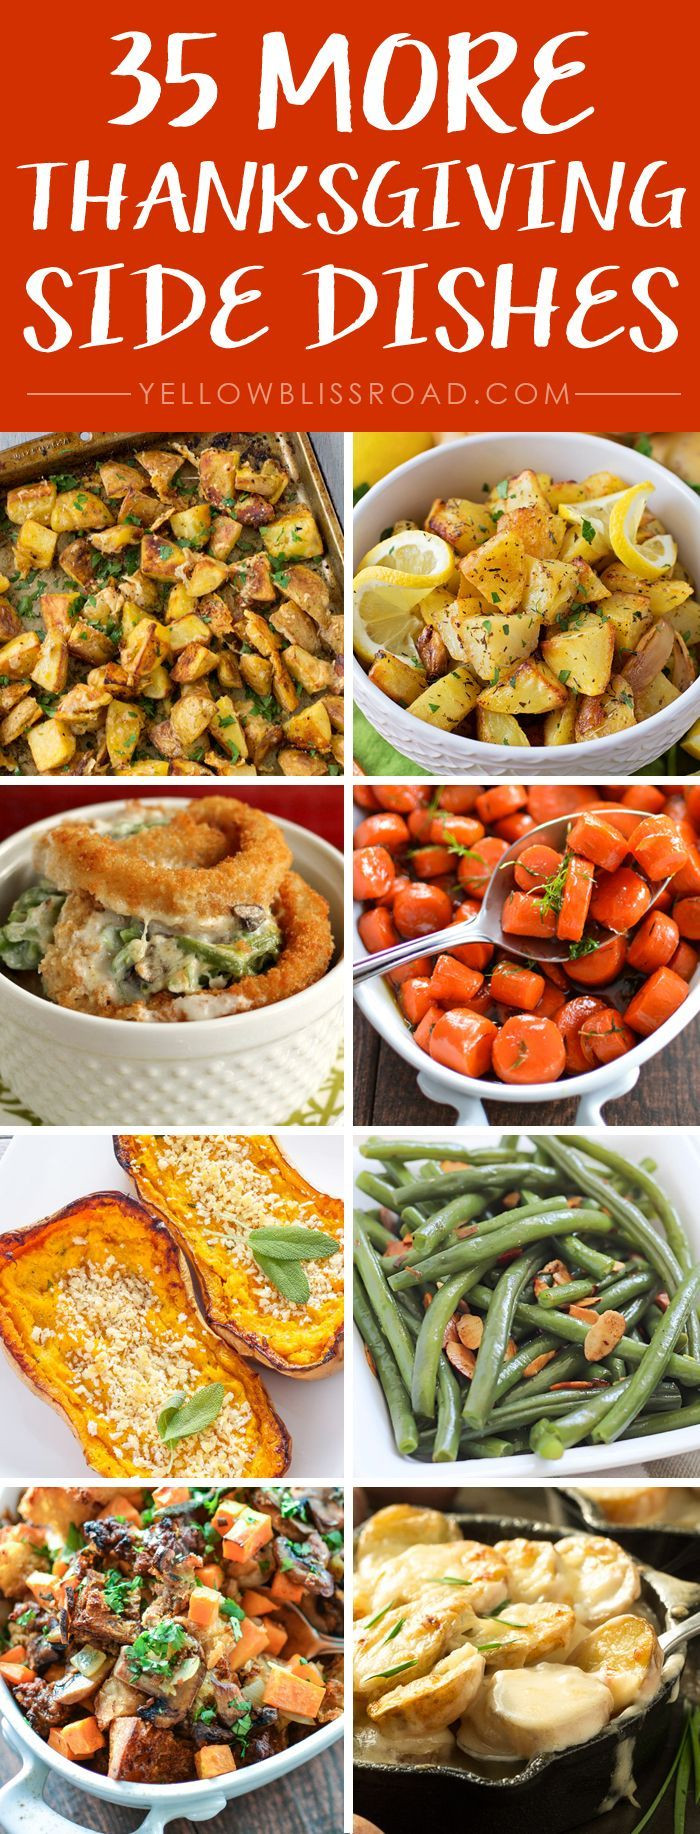 Christmas Side Dishes Pinterest
 17 Best images about Thanksgiving ideas on Pinterest